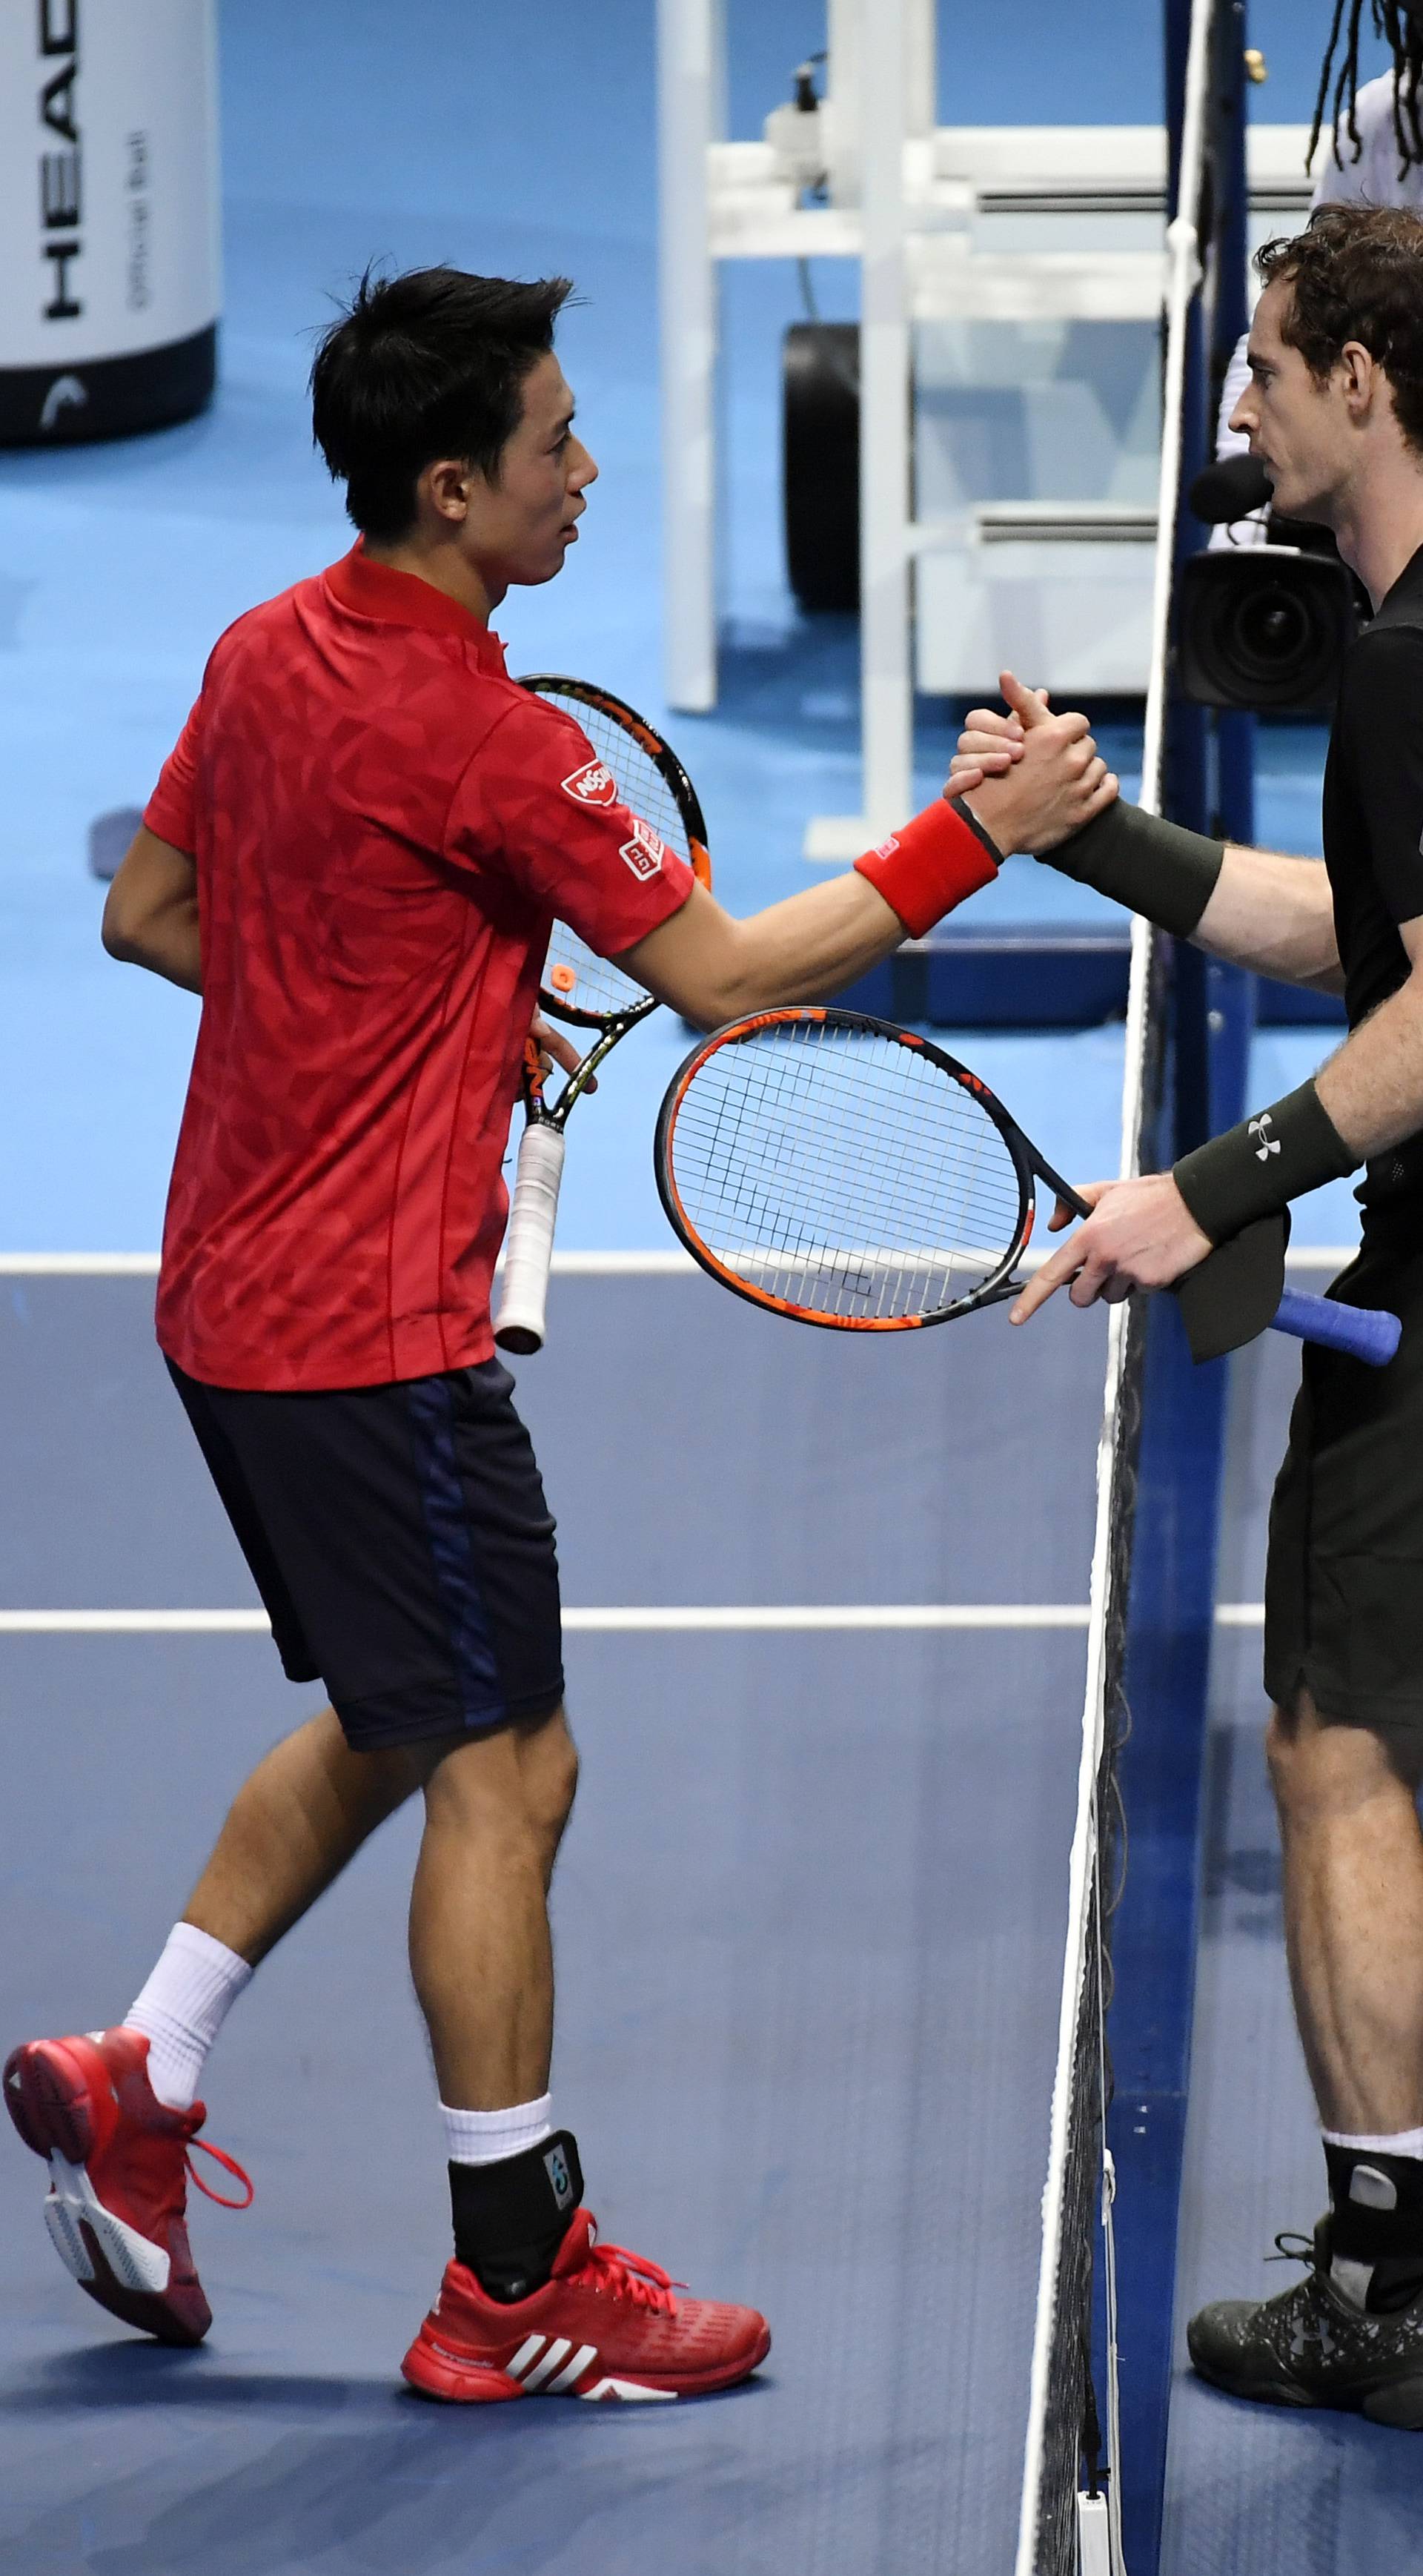 Great Britain's Andy Murray and Japan's Kei Nishikori shake hands after their round robin match